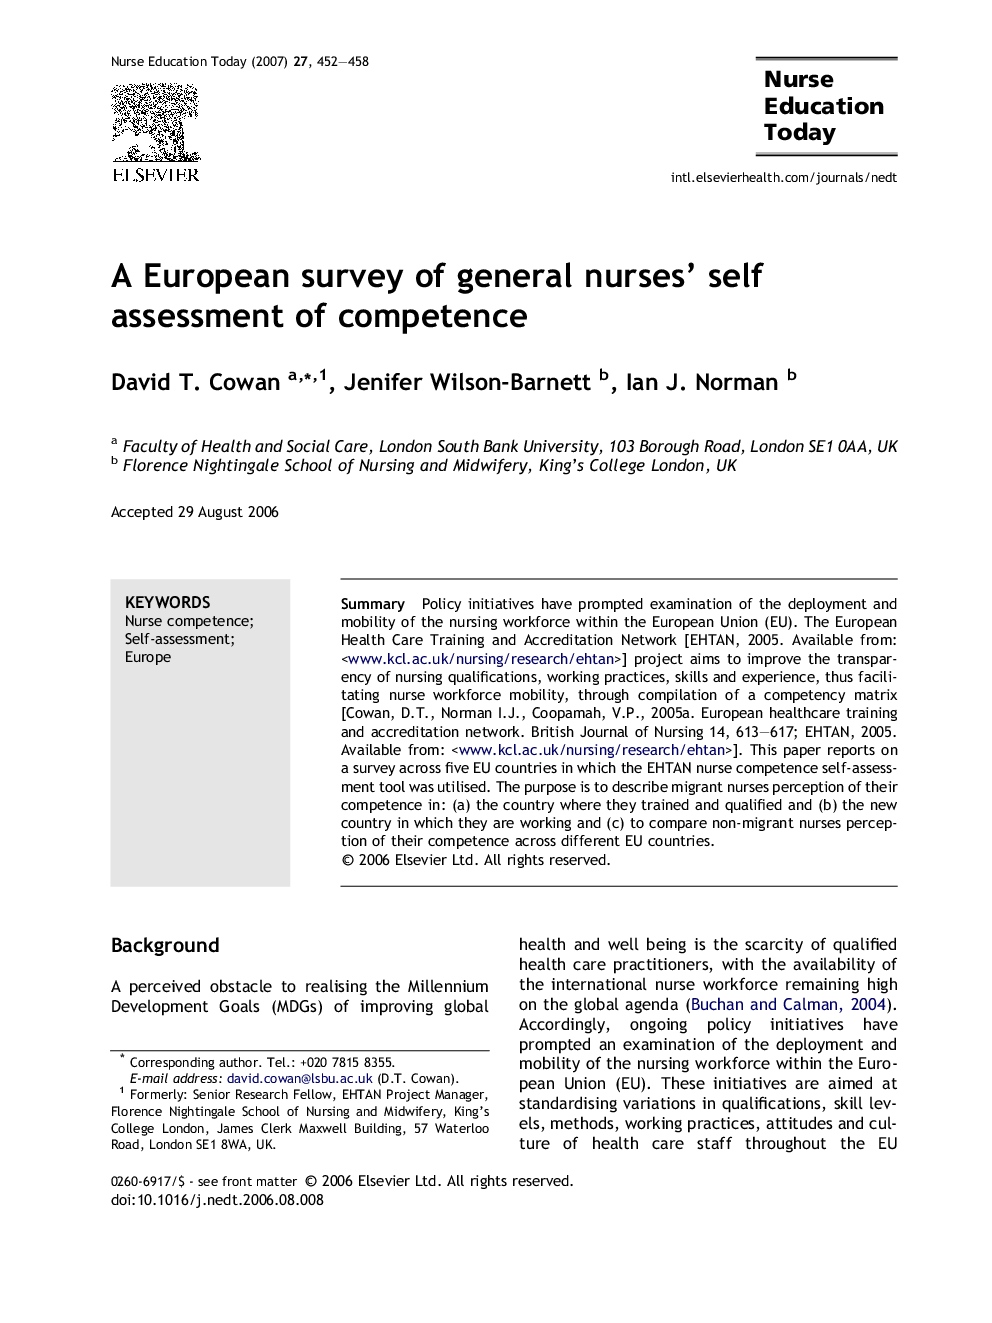 A European survey of general nurses’ self assessment of competence